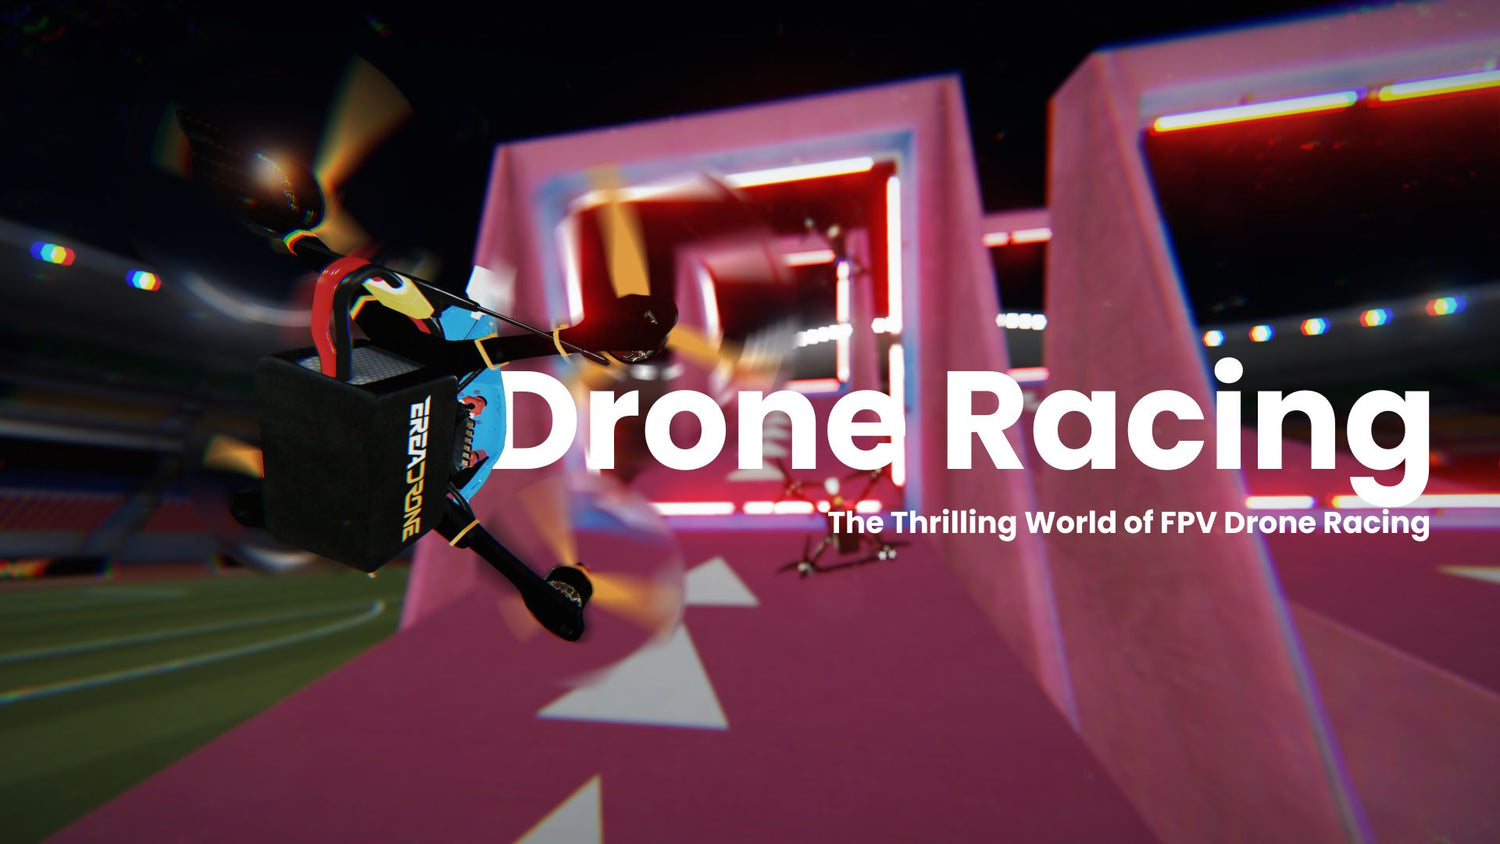  The Thrilling World of FPV Drone Racing